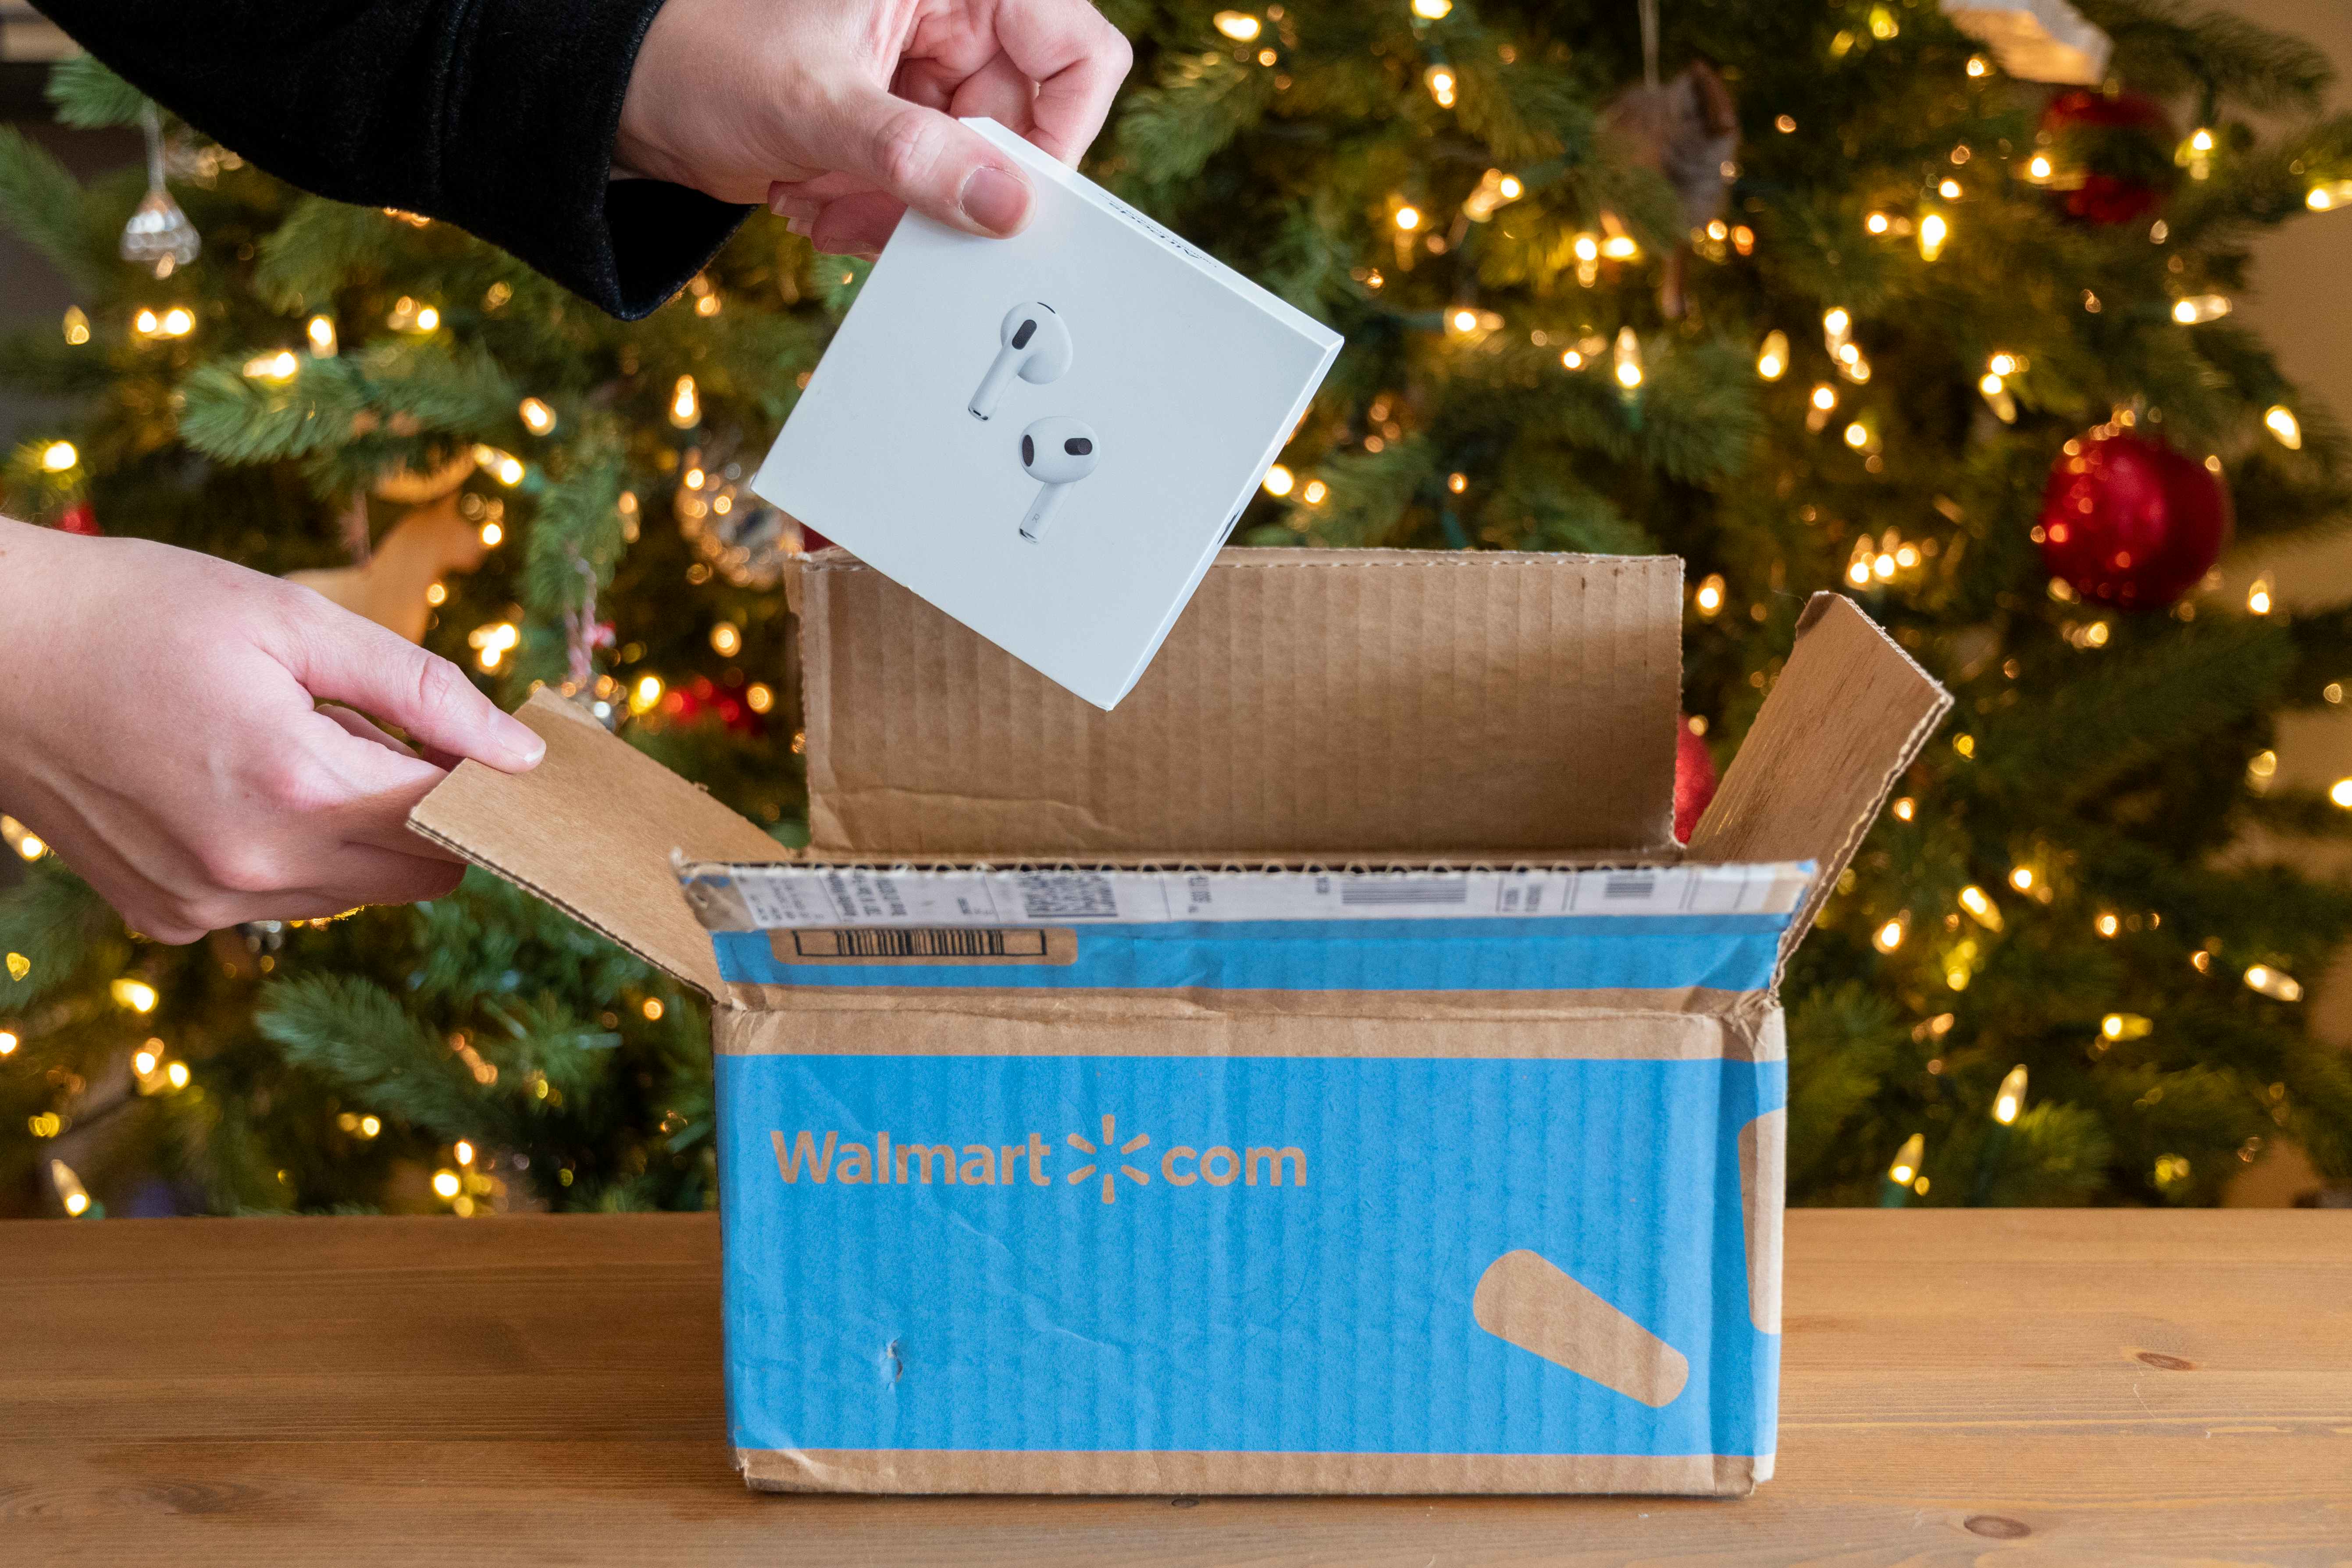 A woman's hand lifting Apple Airpods out of a Walmart shipping box in front of a lit Christmas tree